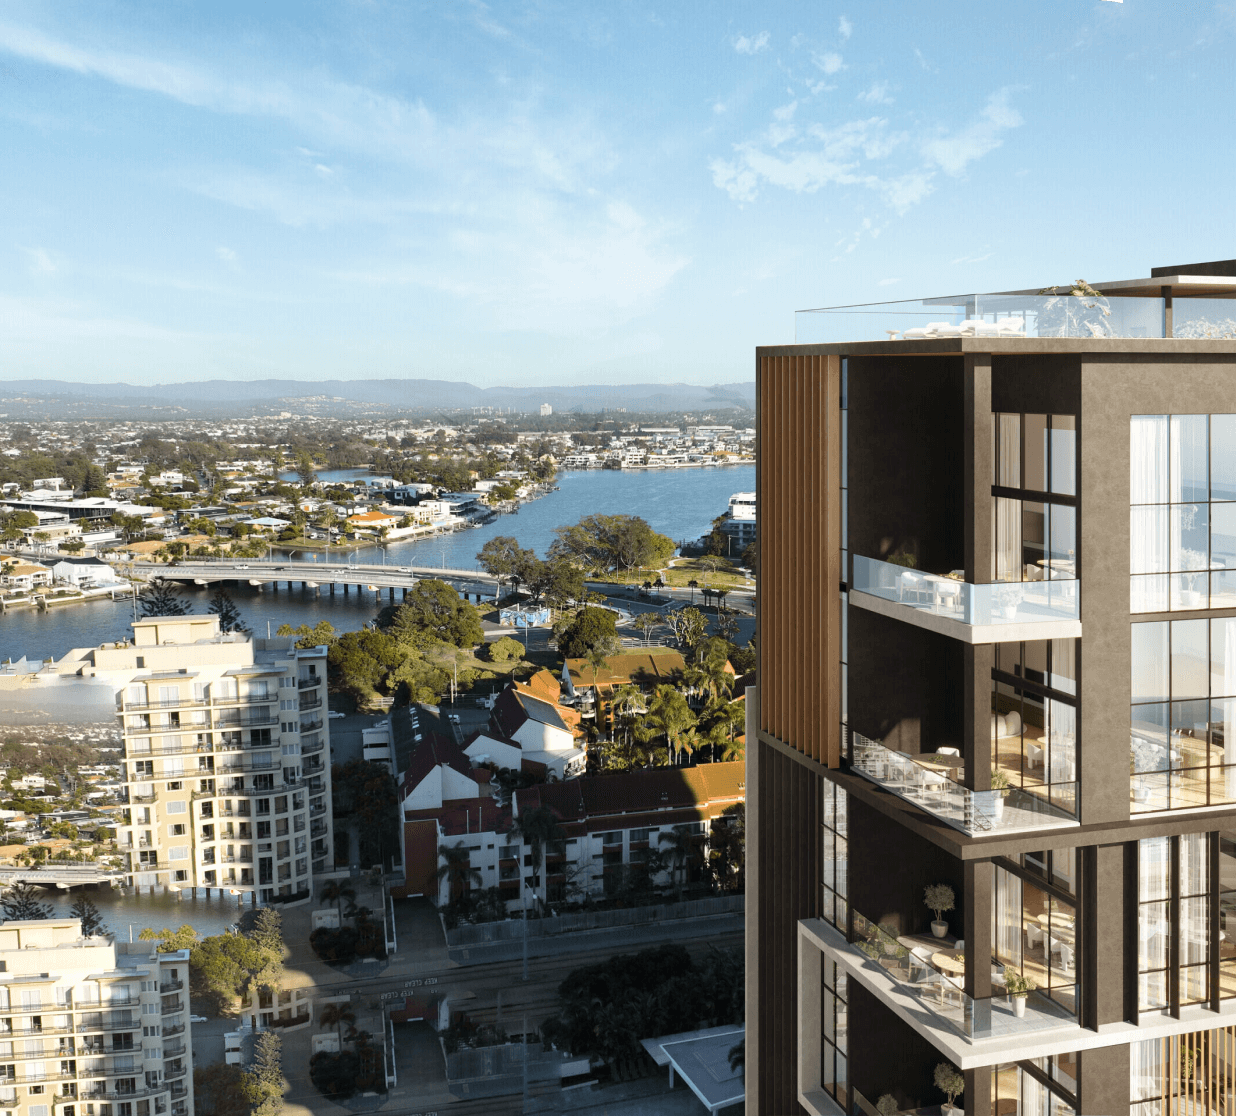 Highly elevated daytime photo on a sunny day. Taller buildings can be seen, especially in the foreground of the photo. The background focus is of a river and more residential buildings. The building at the focus in the foreground takes up a majority of the right half of the image. It depicts a modern building with brown and wooden features, offset against floor to ceiling glass windows. There are balconies on each floor of the building and a terrace on the rooftop. The building appears to be a skyscraper given its height compared to other buildings in the image.